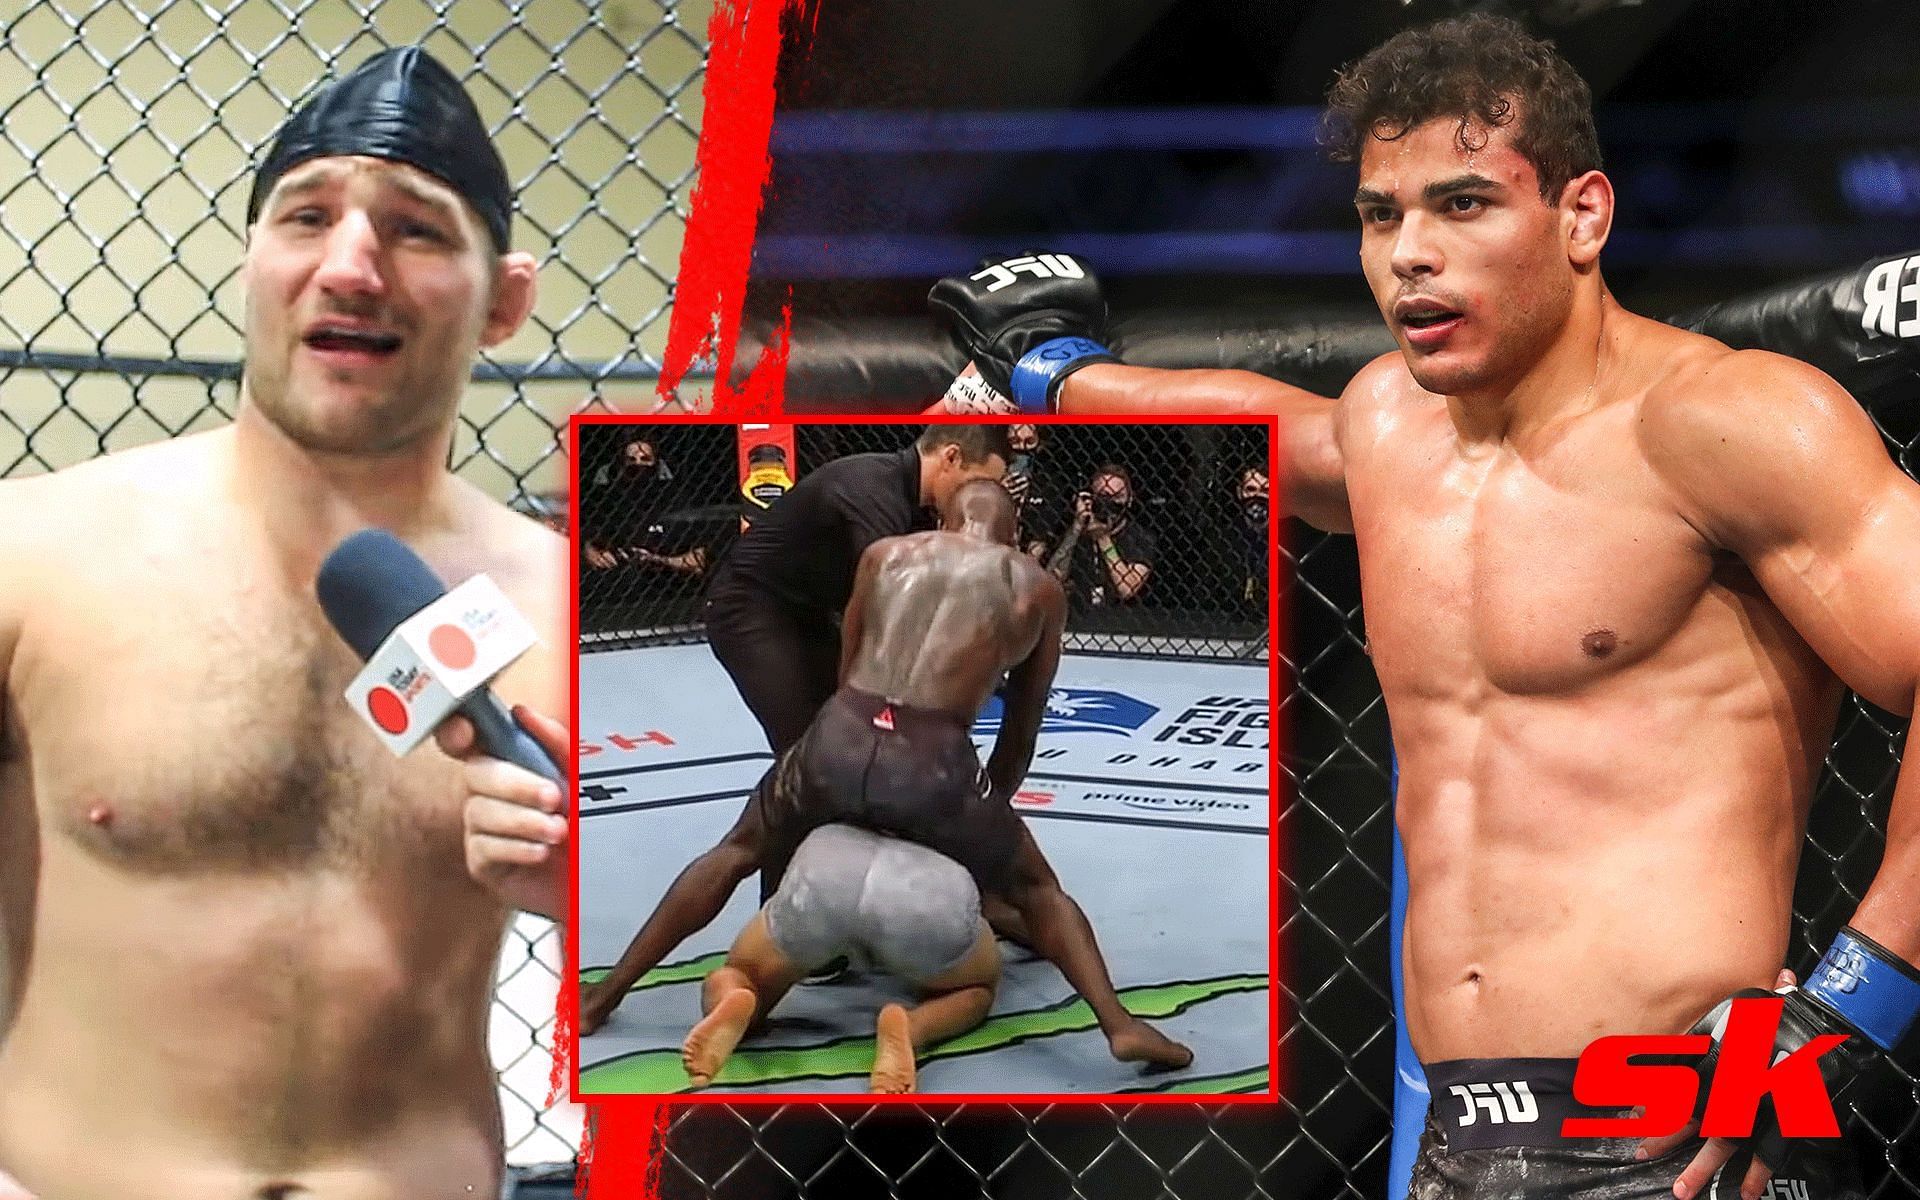 dybt grill kompression Paulo Costa: Sean Strickland shares his NSFW plans for Paulo Costa - "Put  him on his knees and f*** him like Izzy"